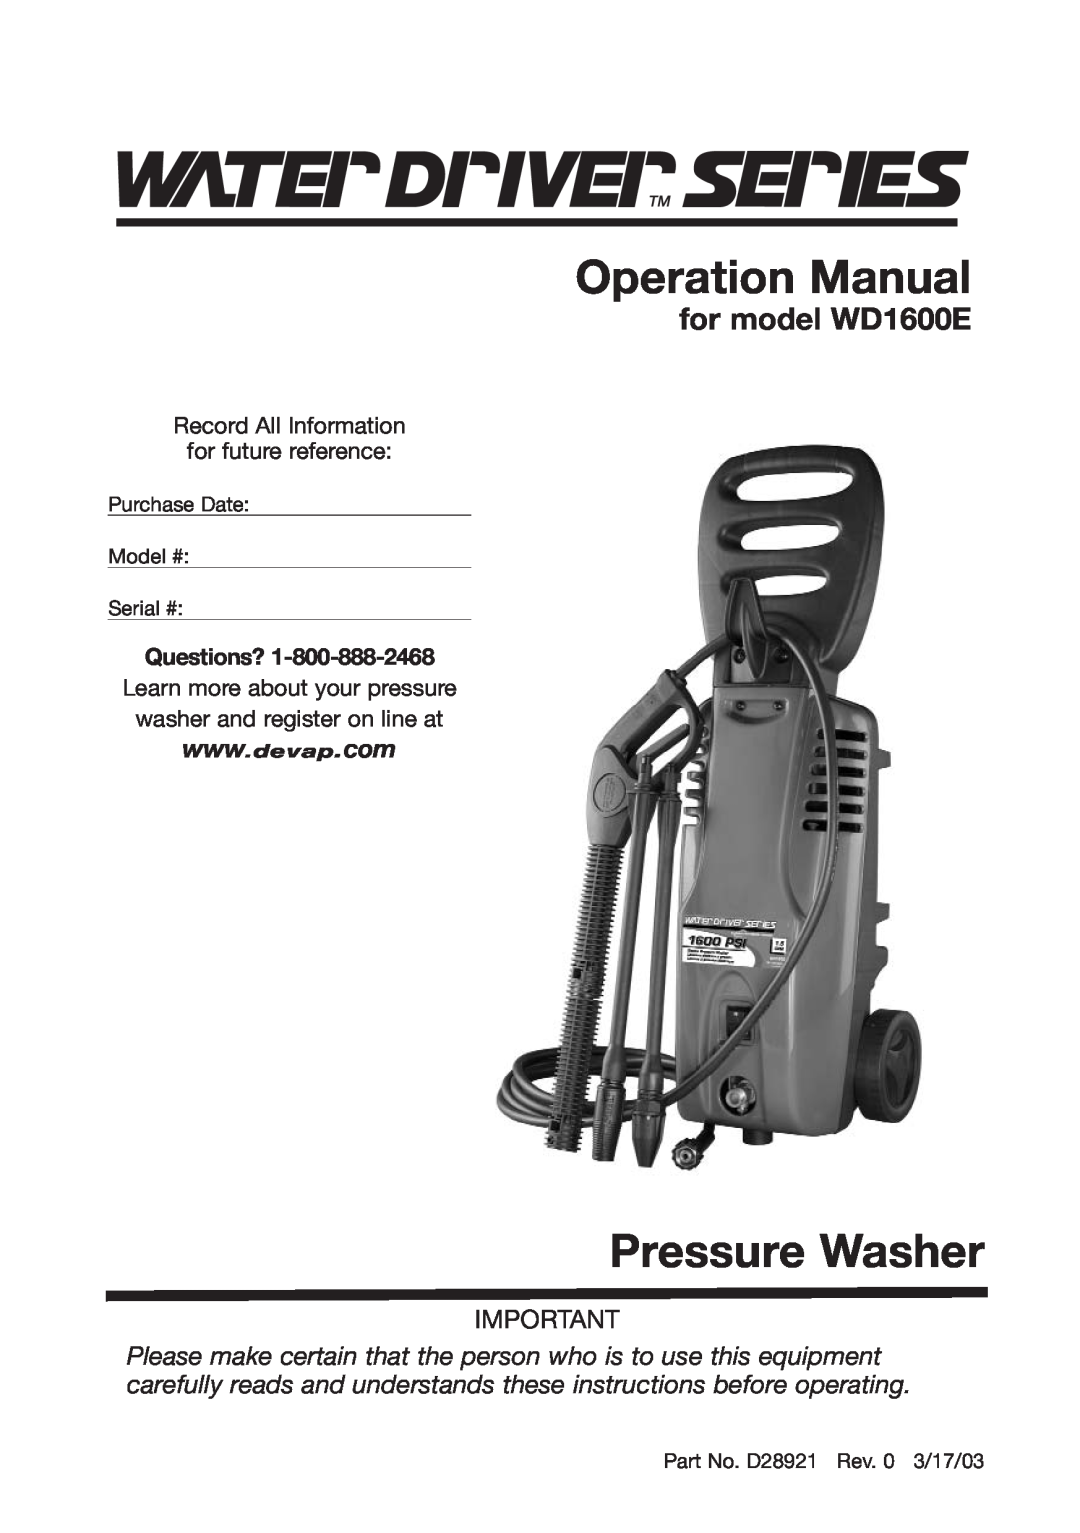 DeVillbiss Air Power Company D28921 operation manual Operation Manual, Pressure Washer, for model WD1600E, Questions? 